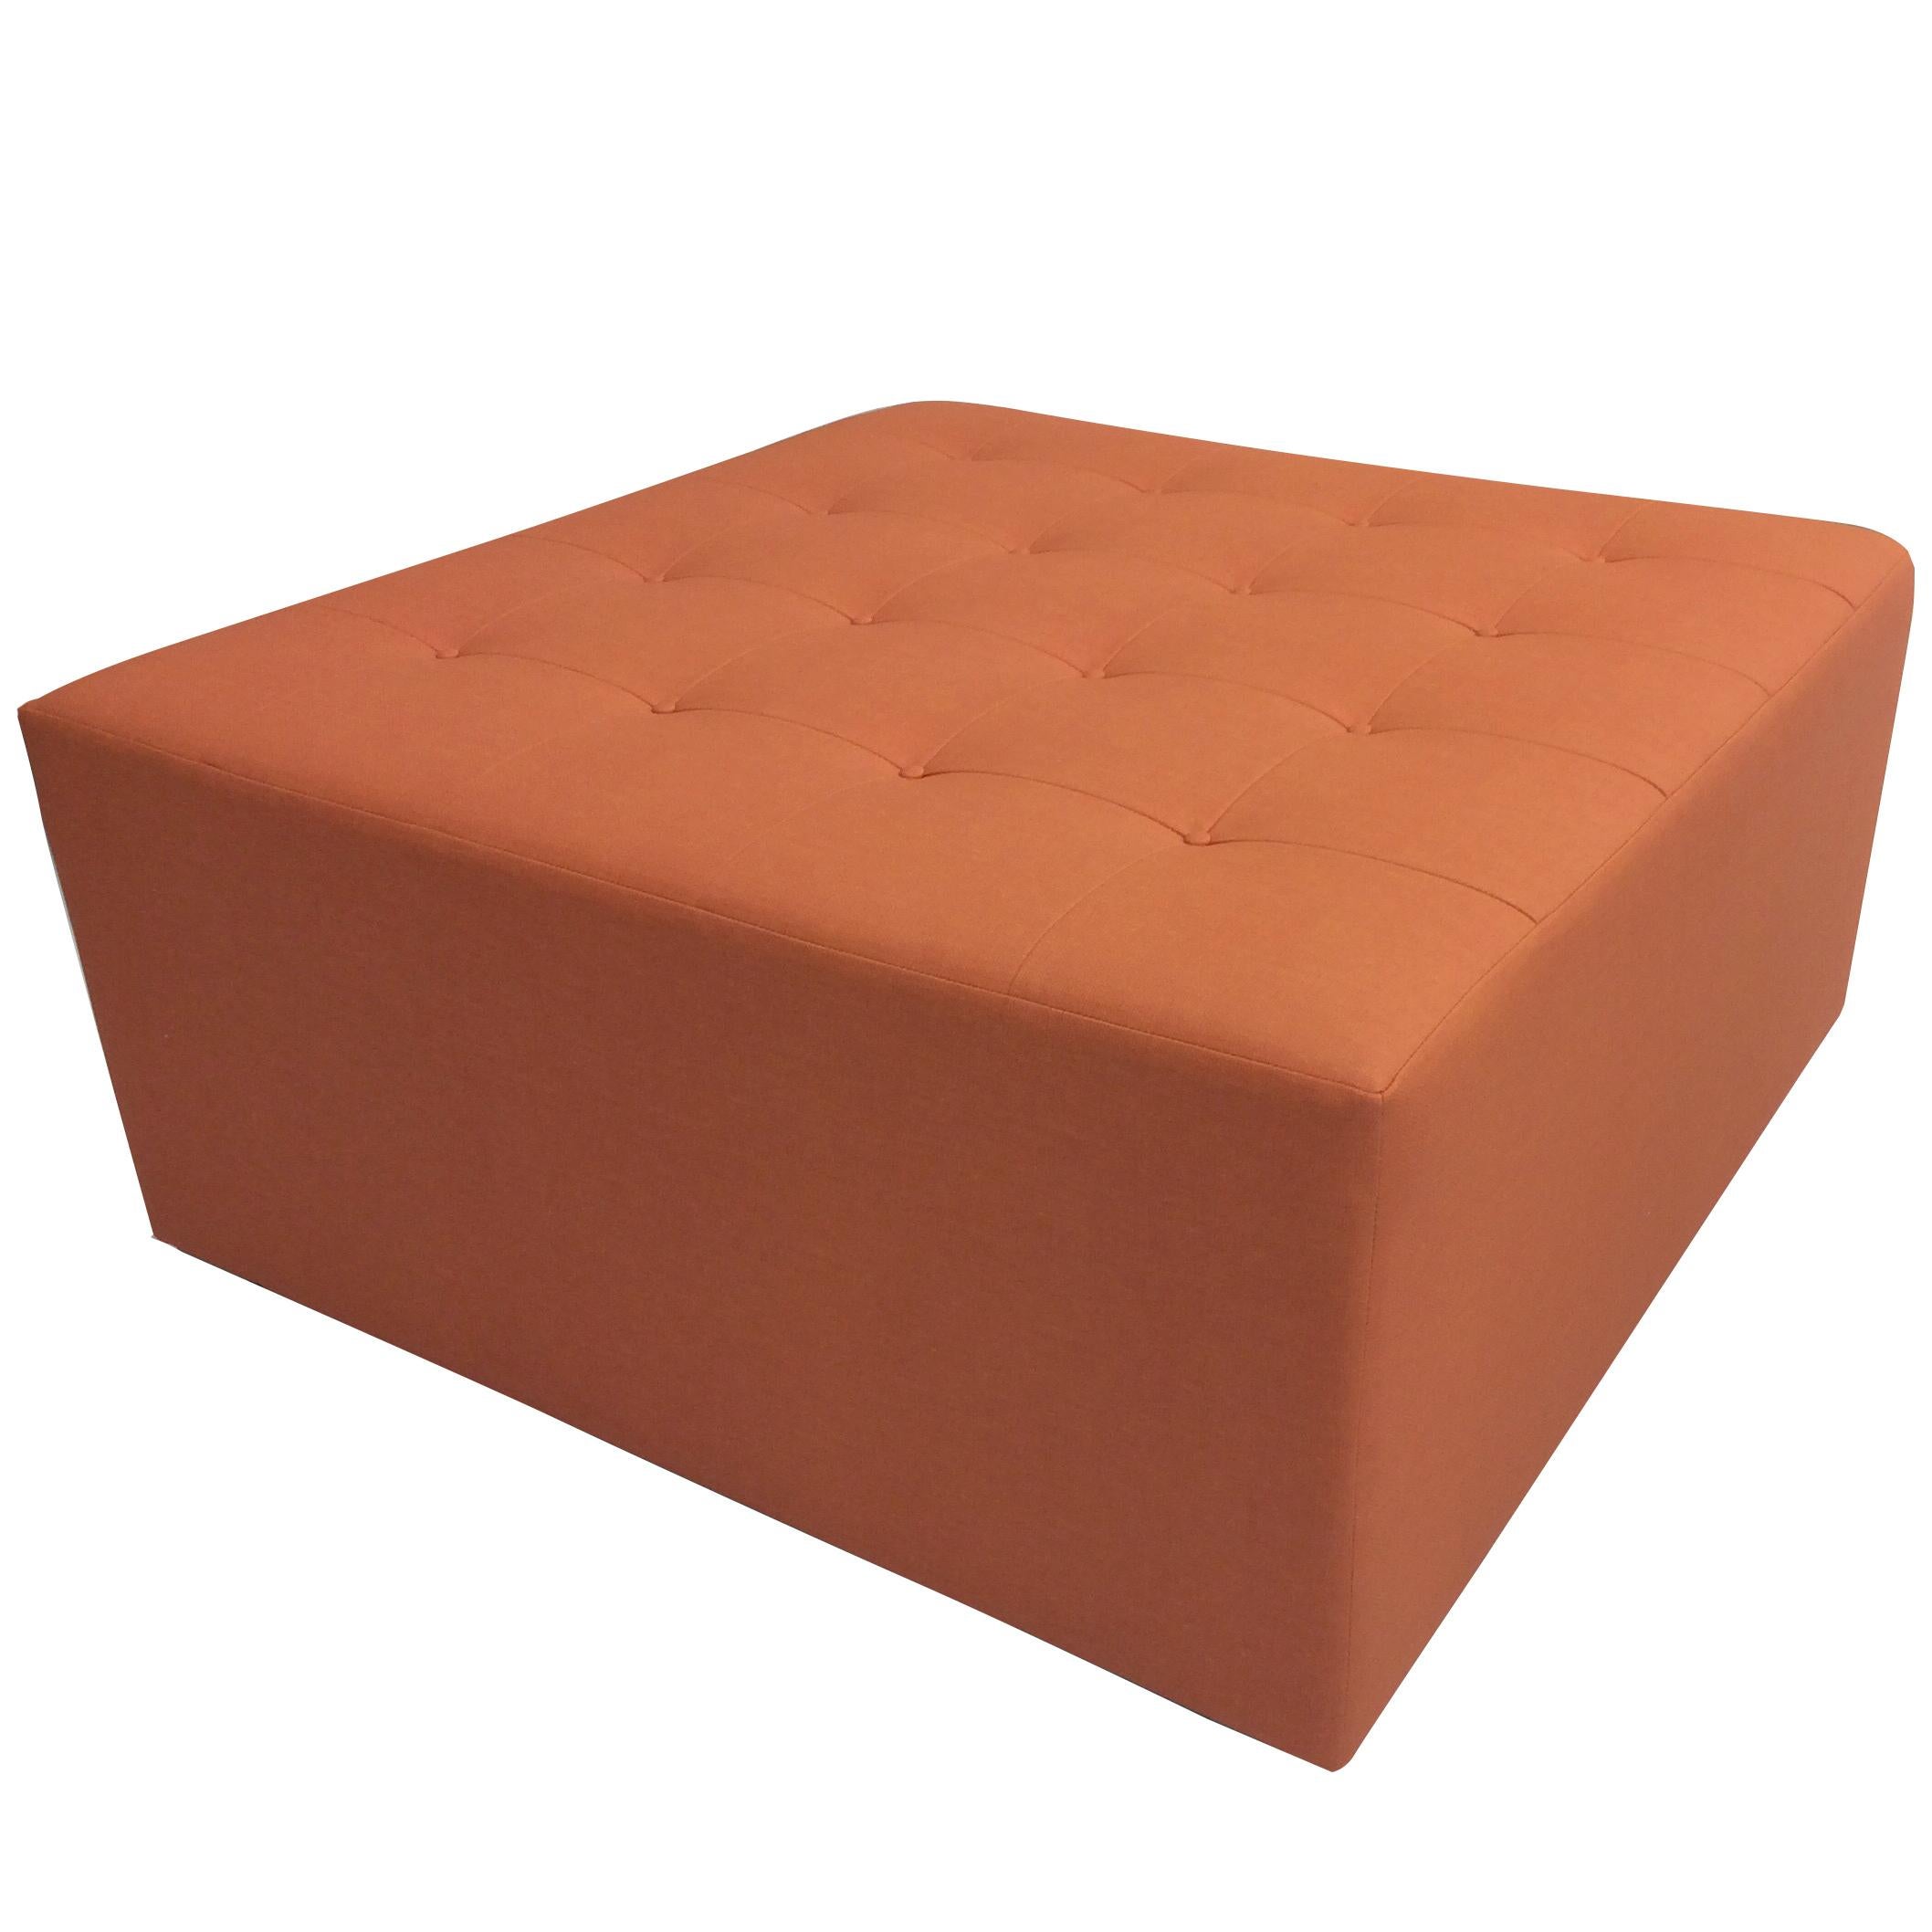 A large square ottoman with button tufted top and small block legs. The ottoman is shown in an orange vinyl fabric. Custom built to order and handmade at our studio in Norwalk, Connecticut. 

Measurement of ottoman shown: 18